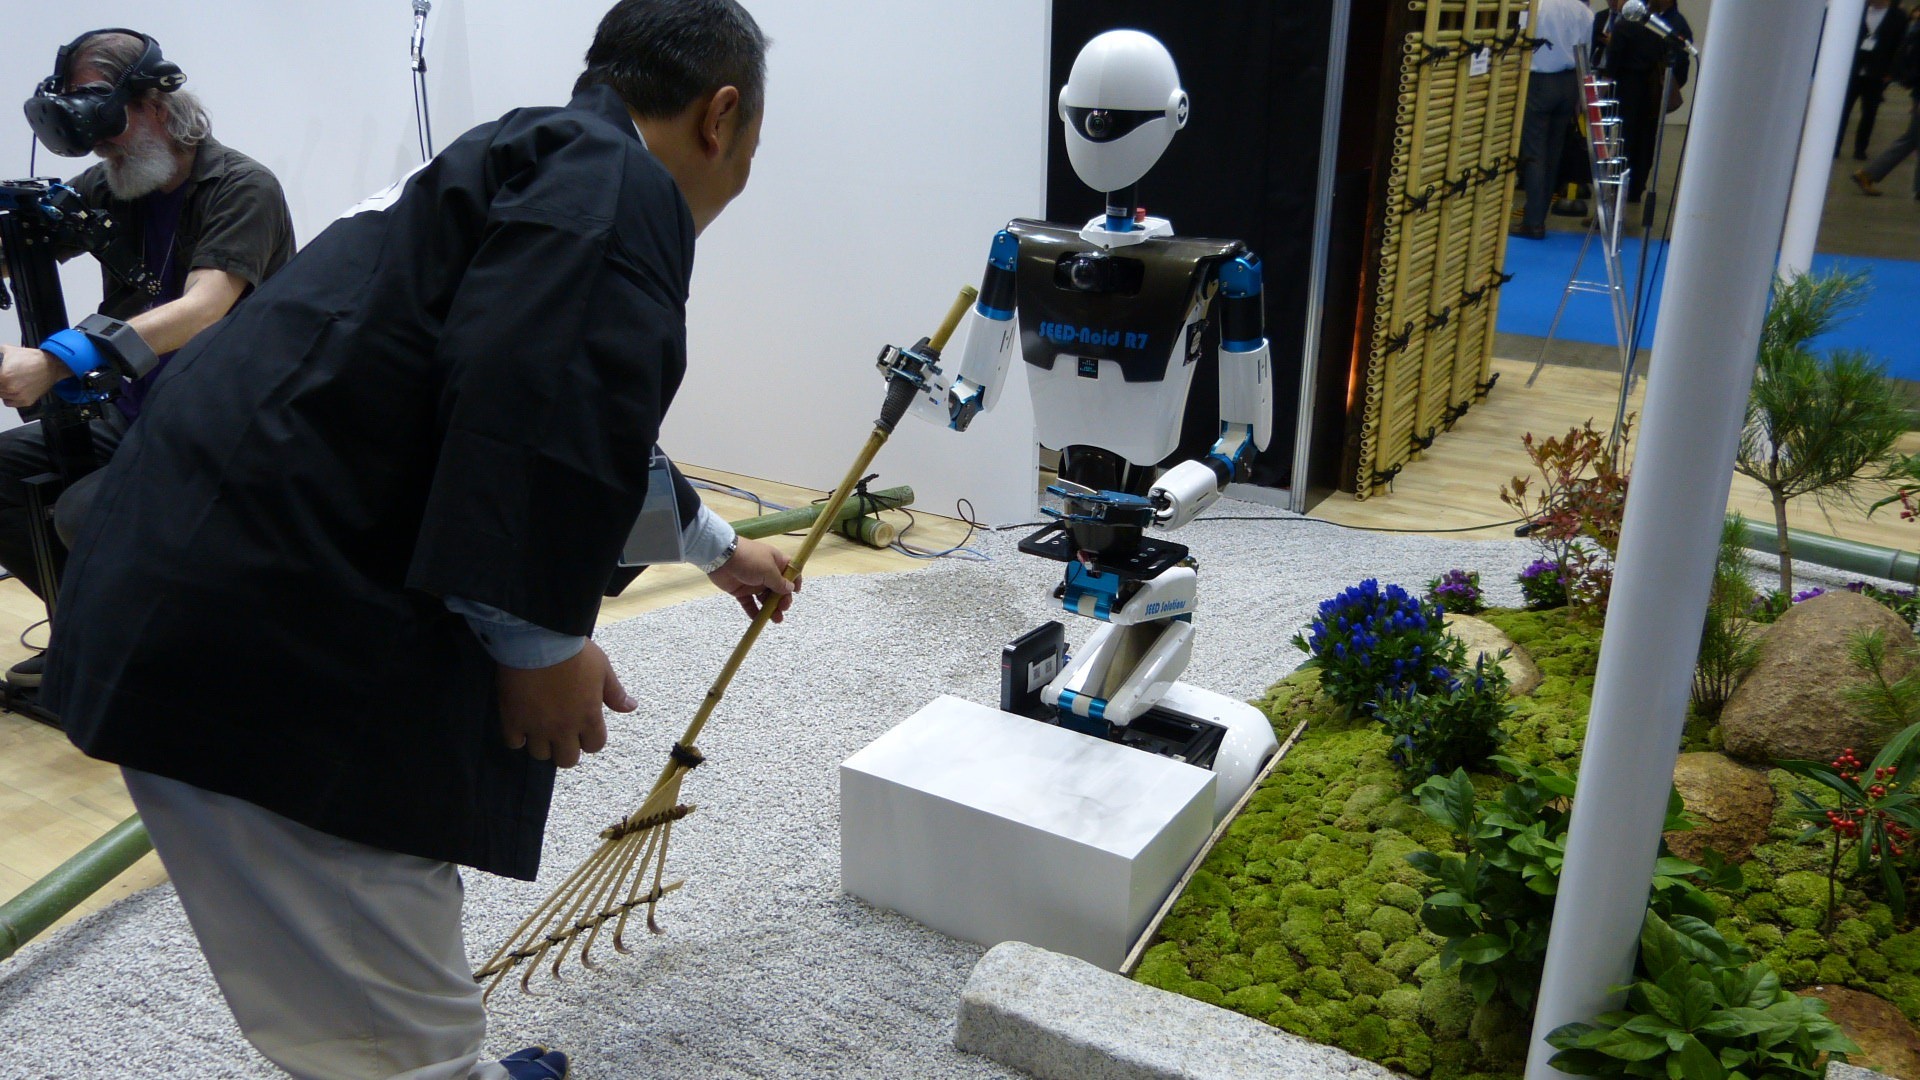 a japanese man hands a robot a rake near some sand and plants.  Earl is in the background using the vr system.